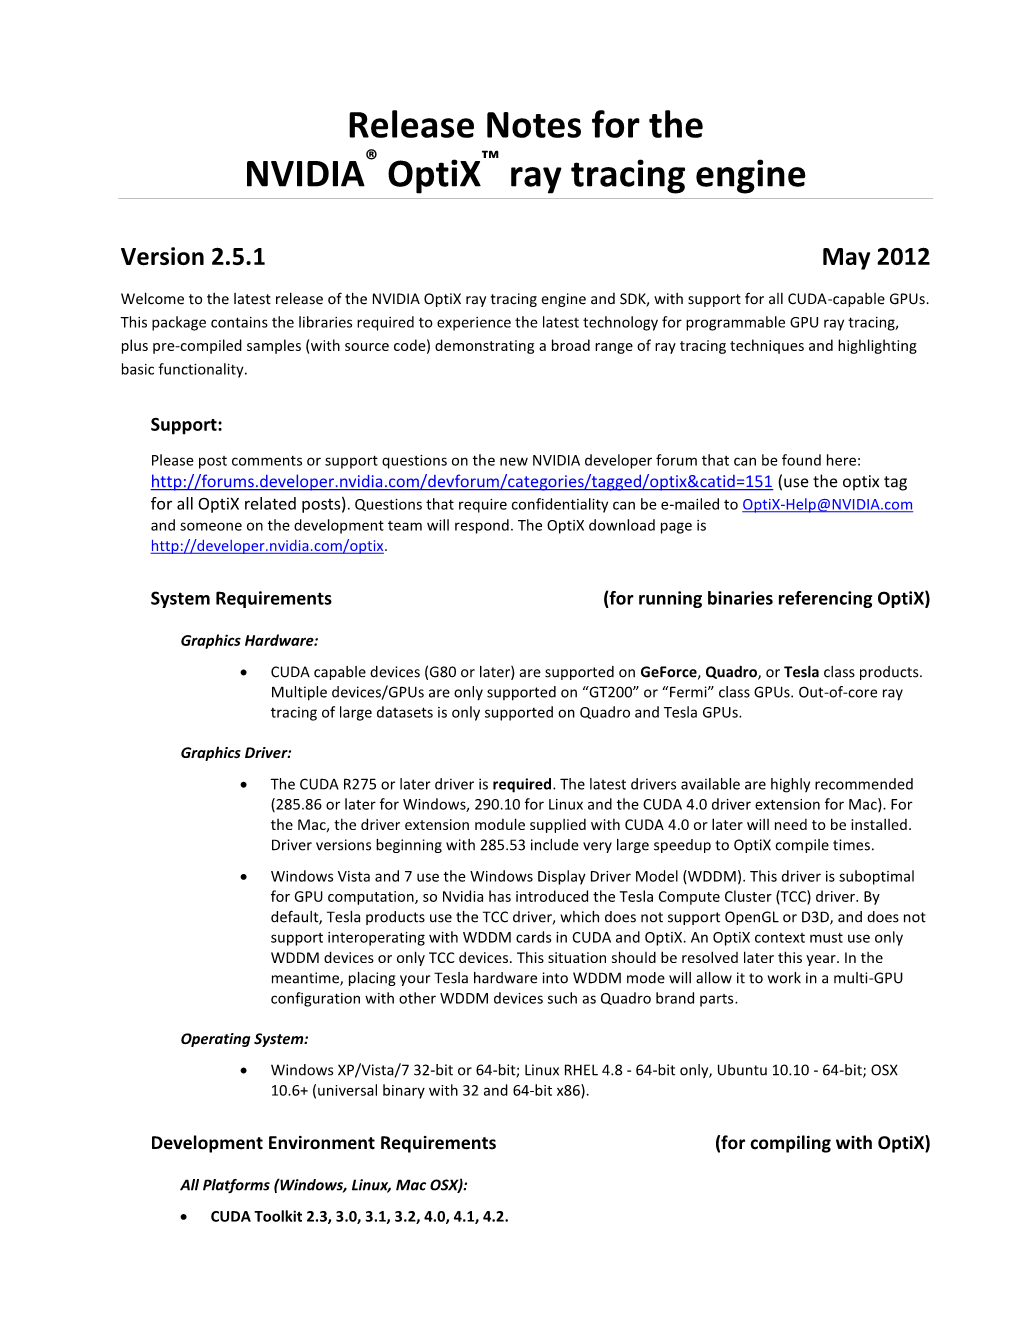 Release Notes for the NVIDIA ® Optix ™ Ray Tracing Engine Version 2.5.1